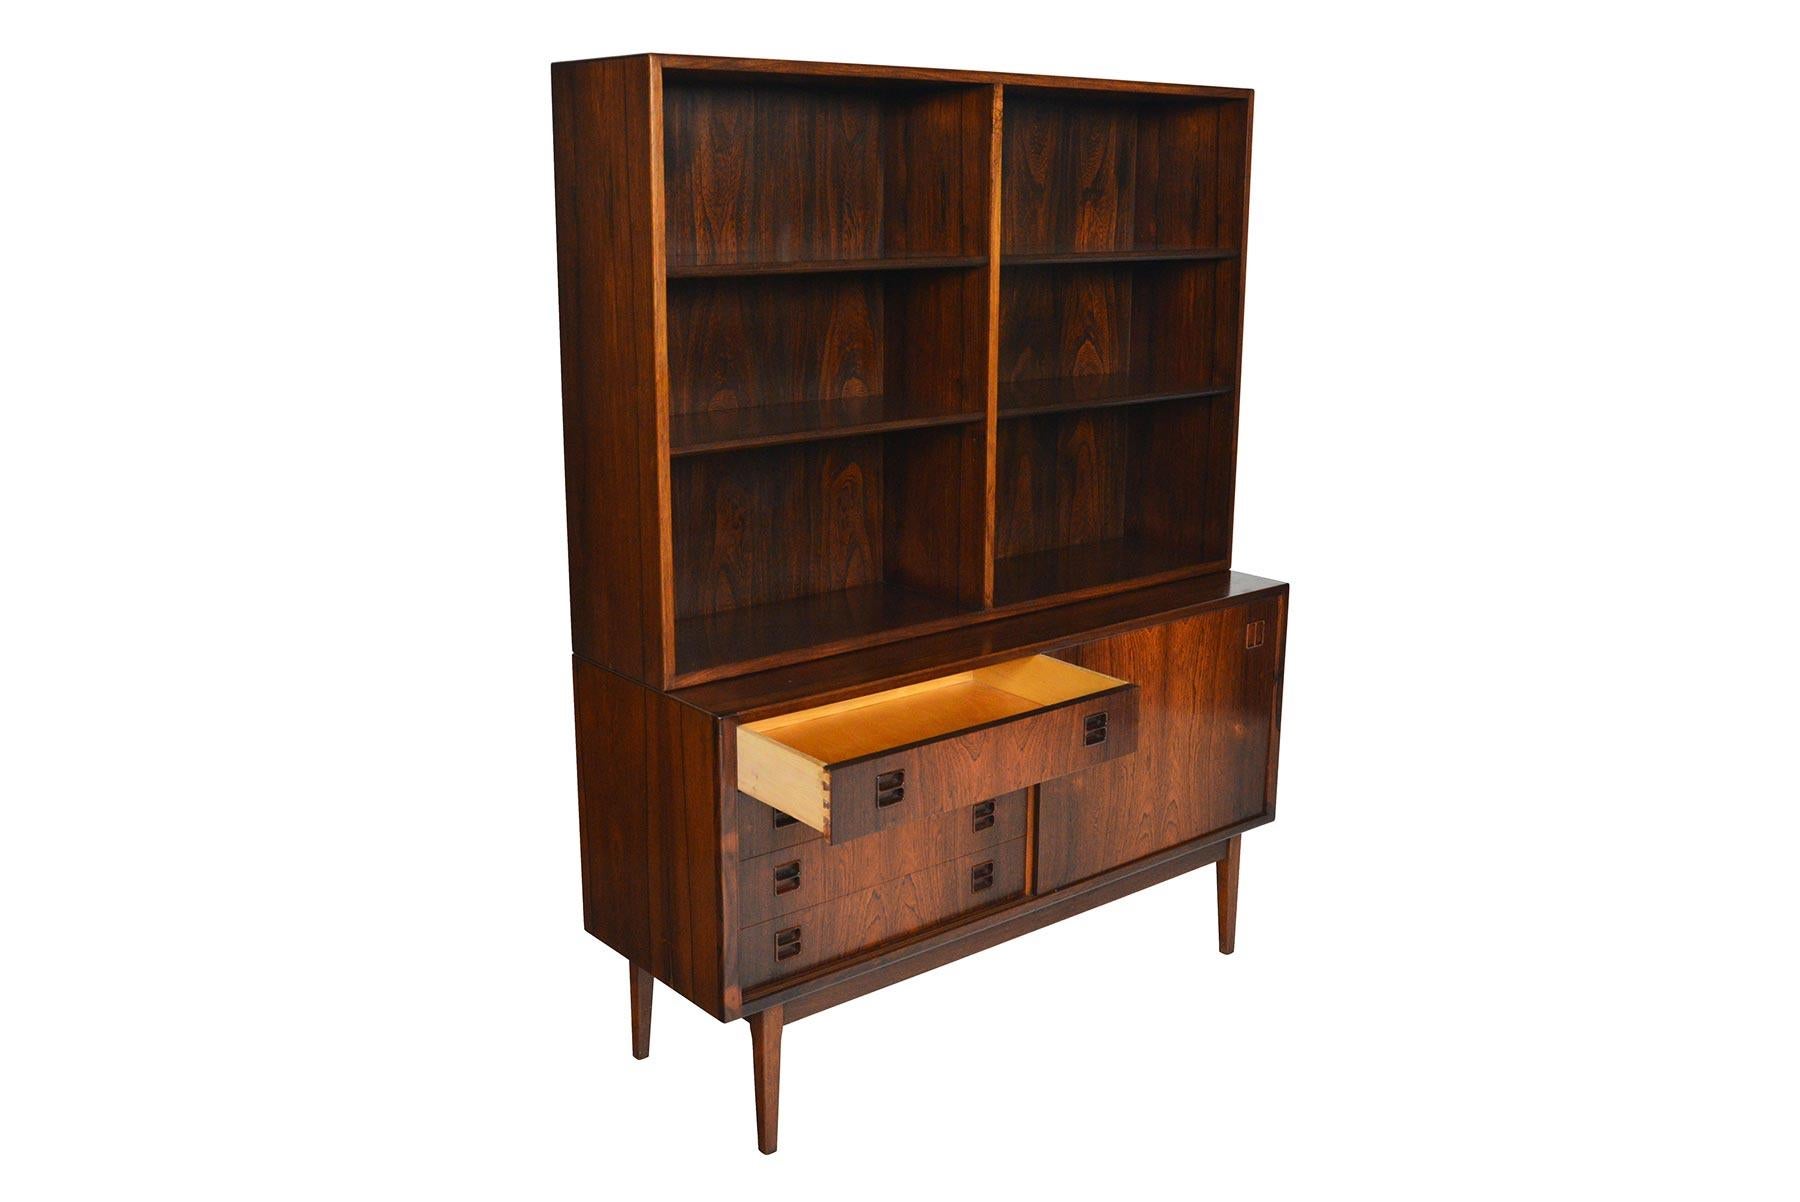 Wonderfully adaptable, this Danish modern rosewood credenza features a removable bookcase hutch. The credenza offers a cabinet with two adjustable shelves and a bank of four drawers. The two bay hutch is outfitted with four adjustable shelves. In